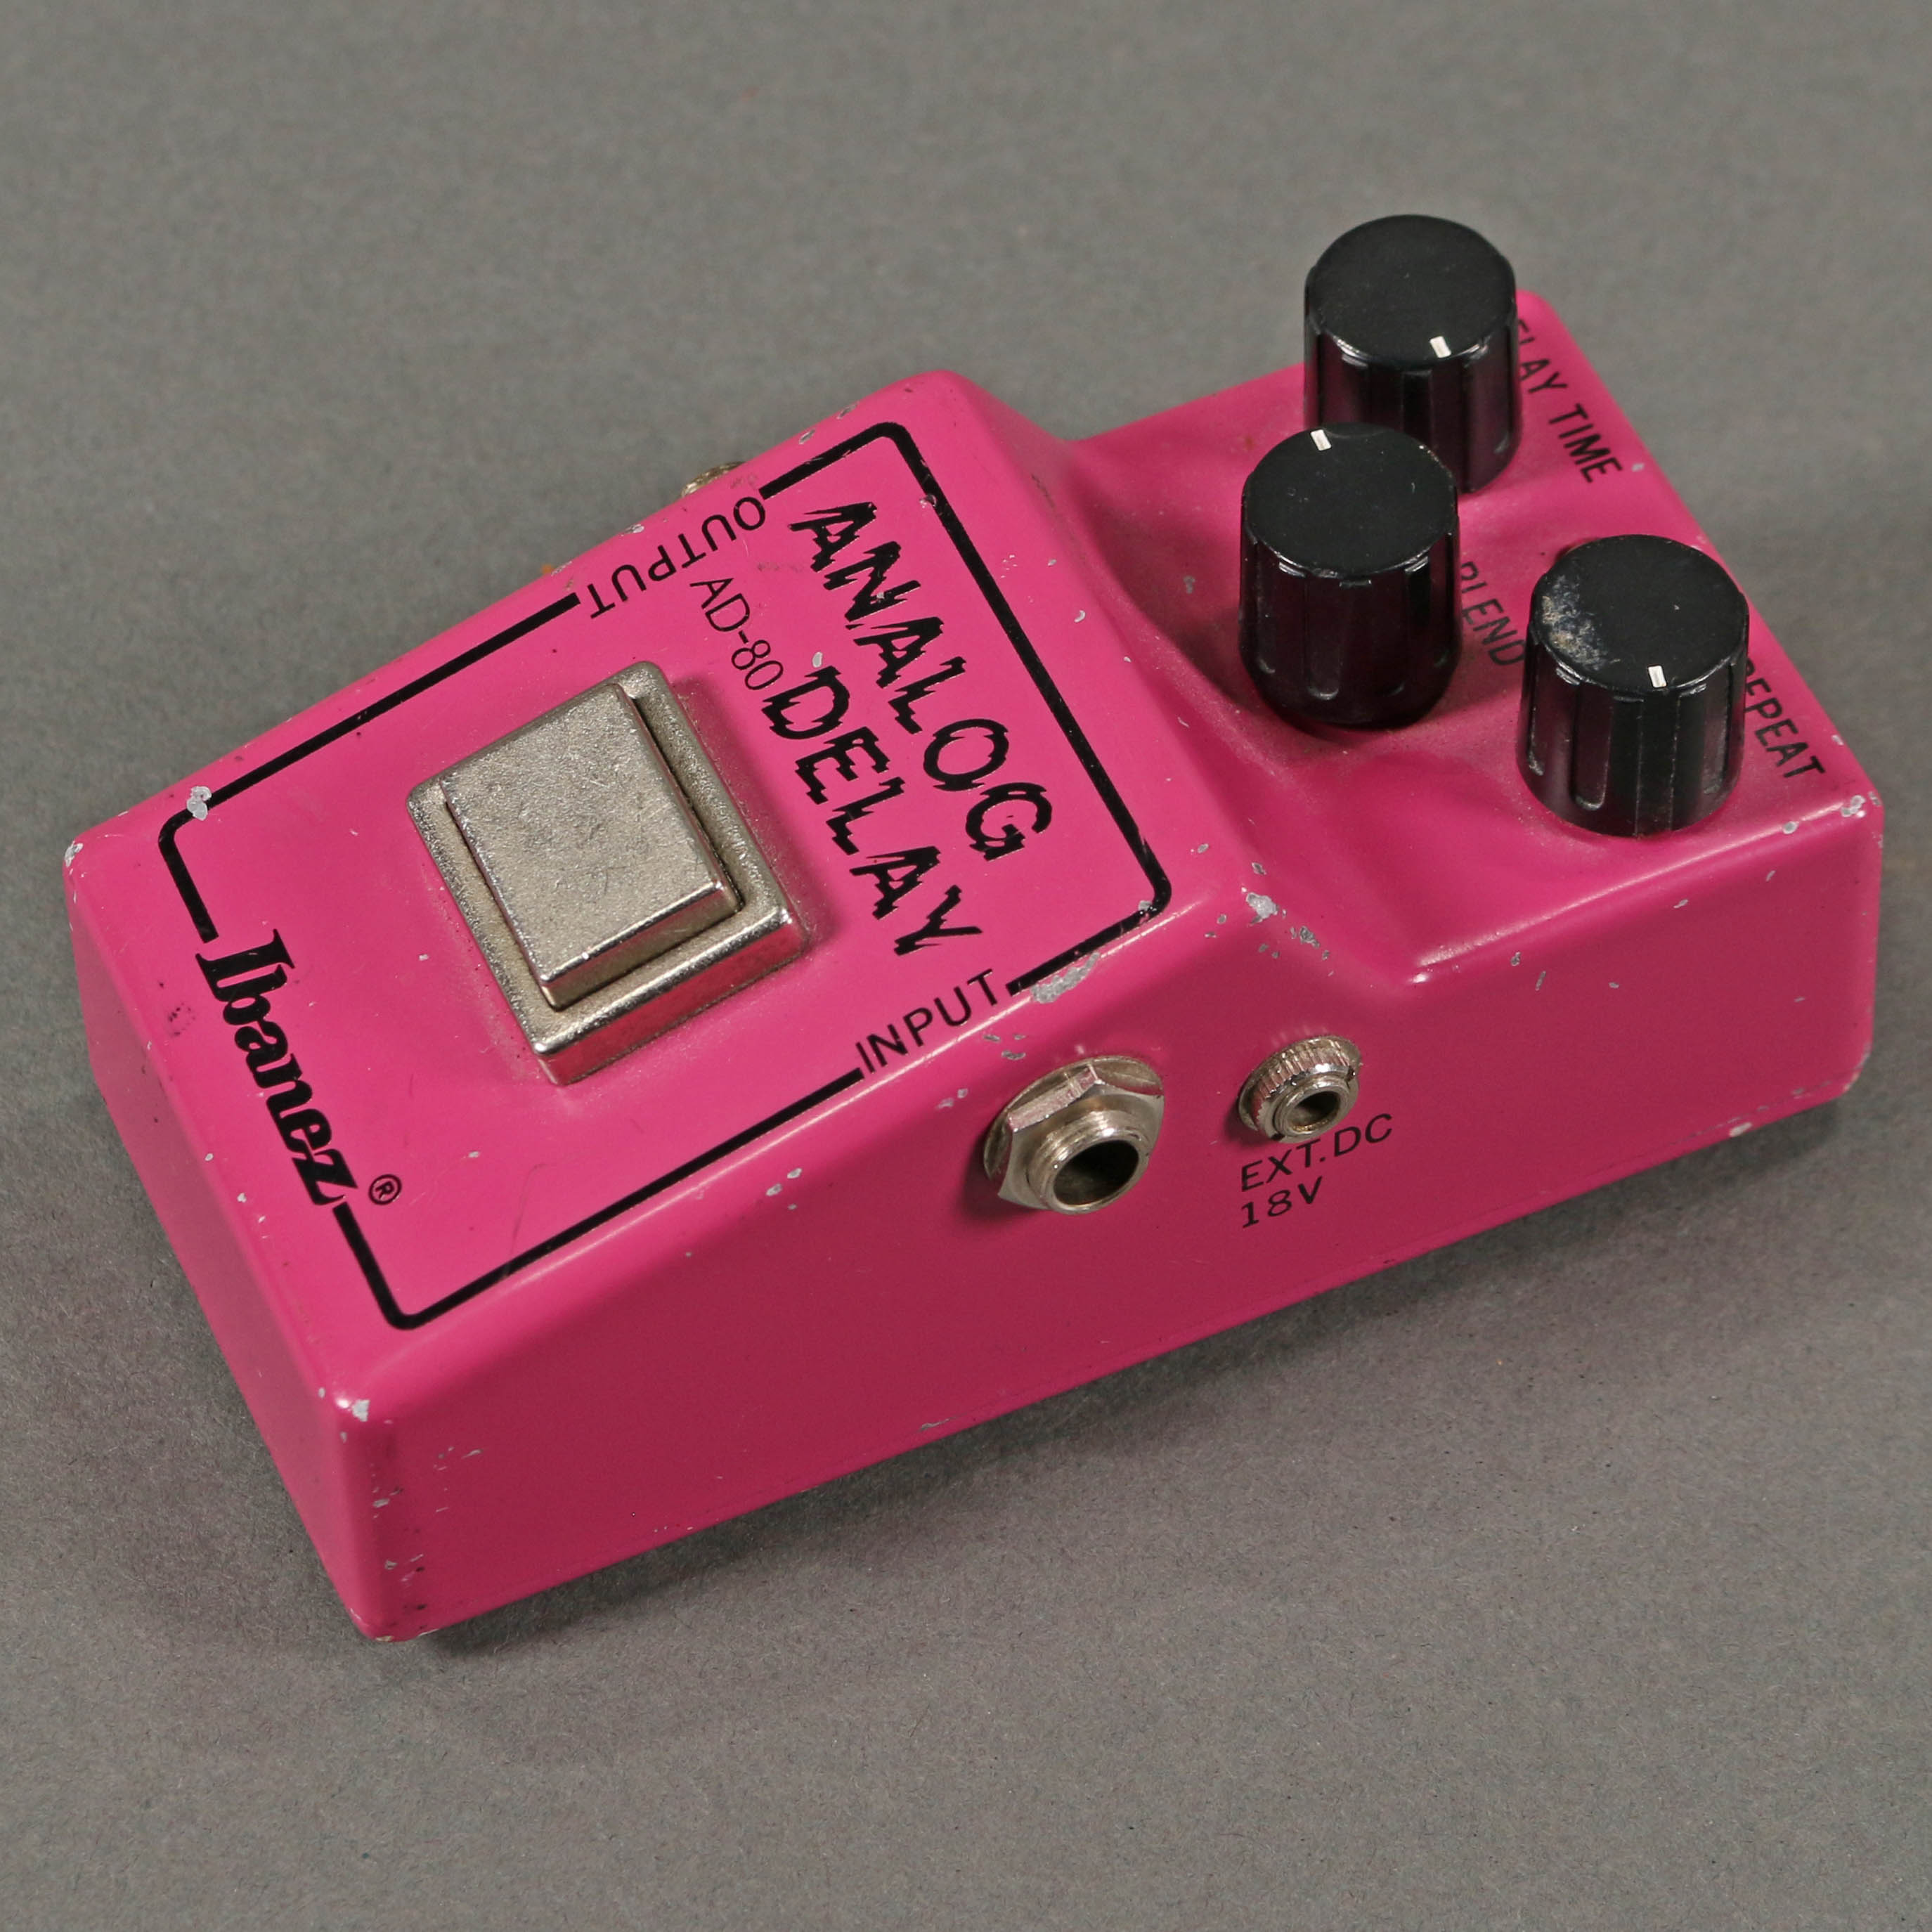 Ibanez AD-80 Analog Delay Made In Japan 